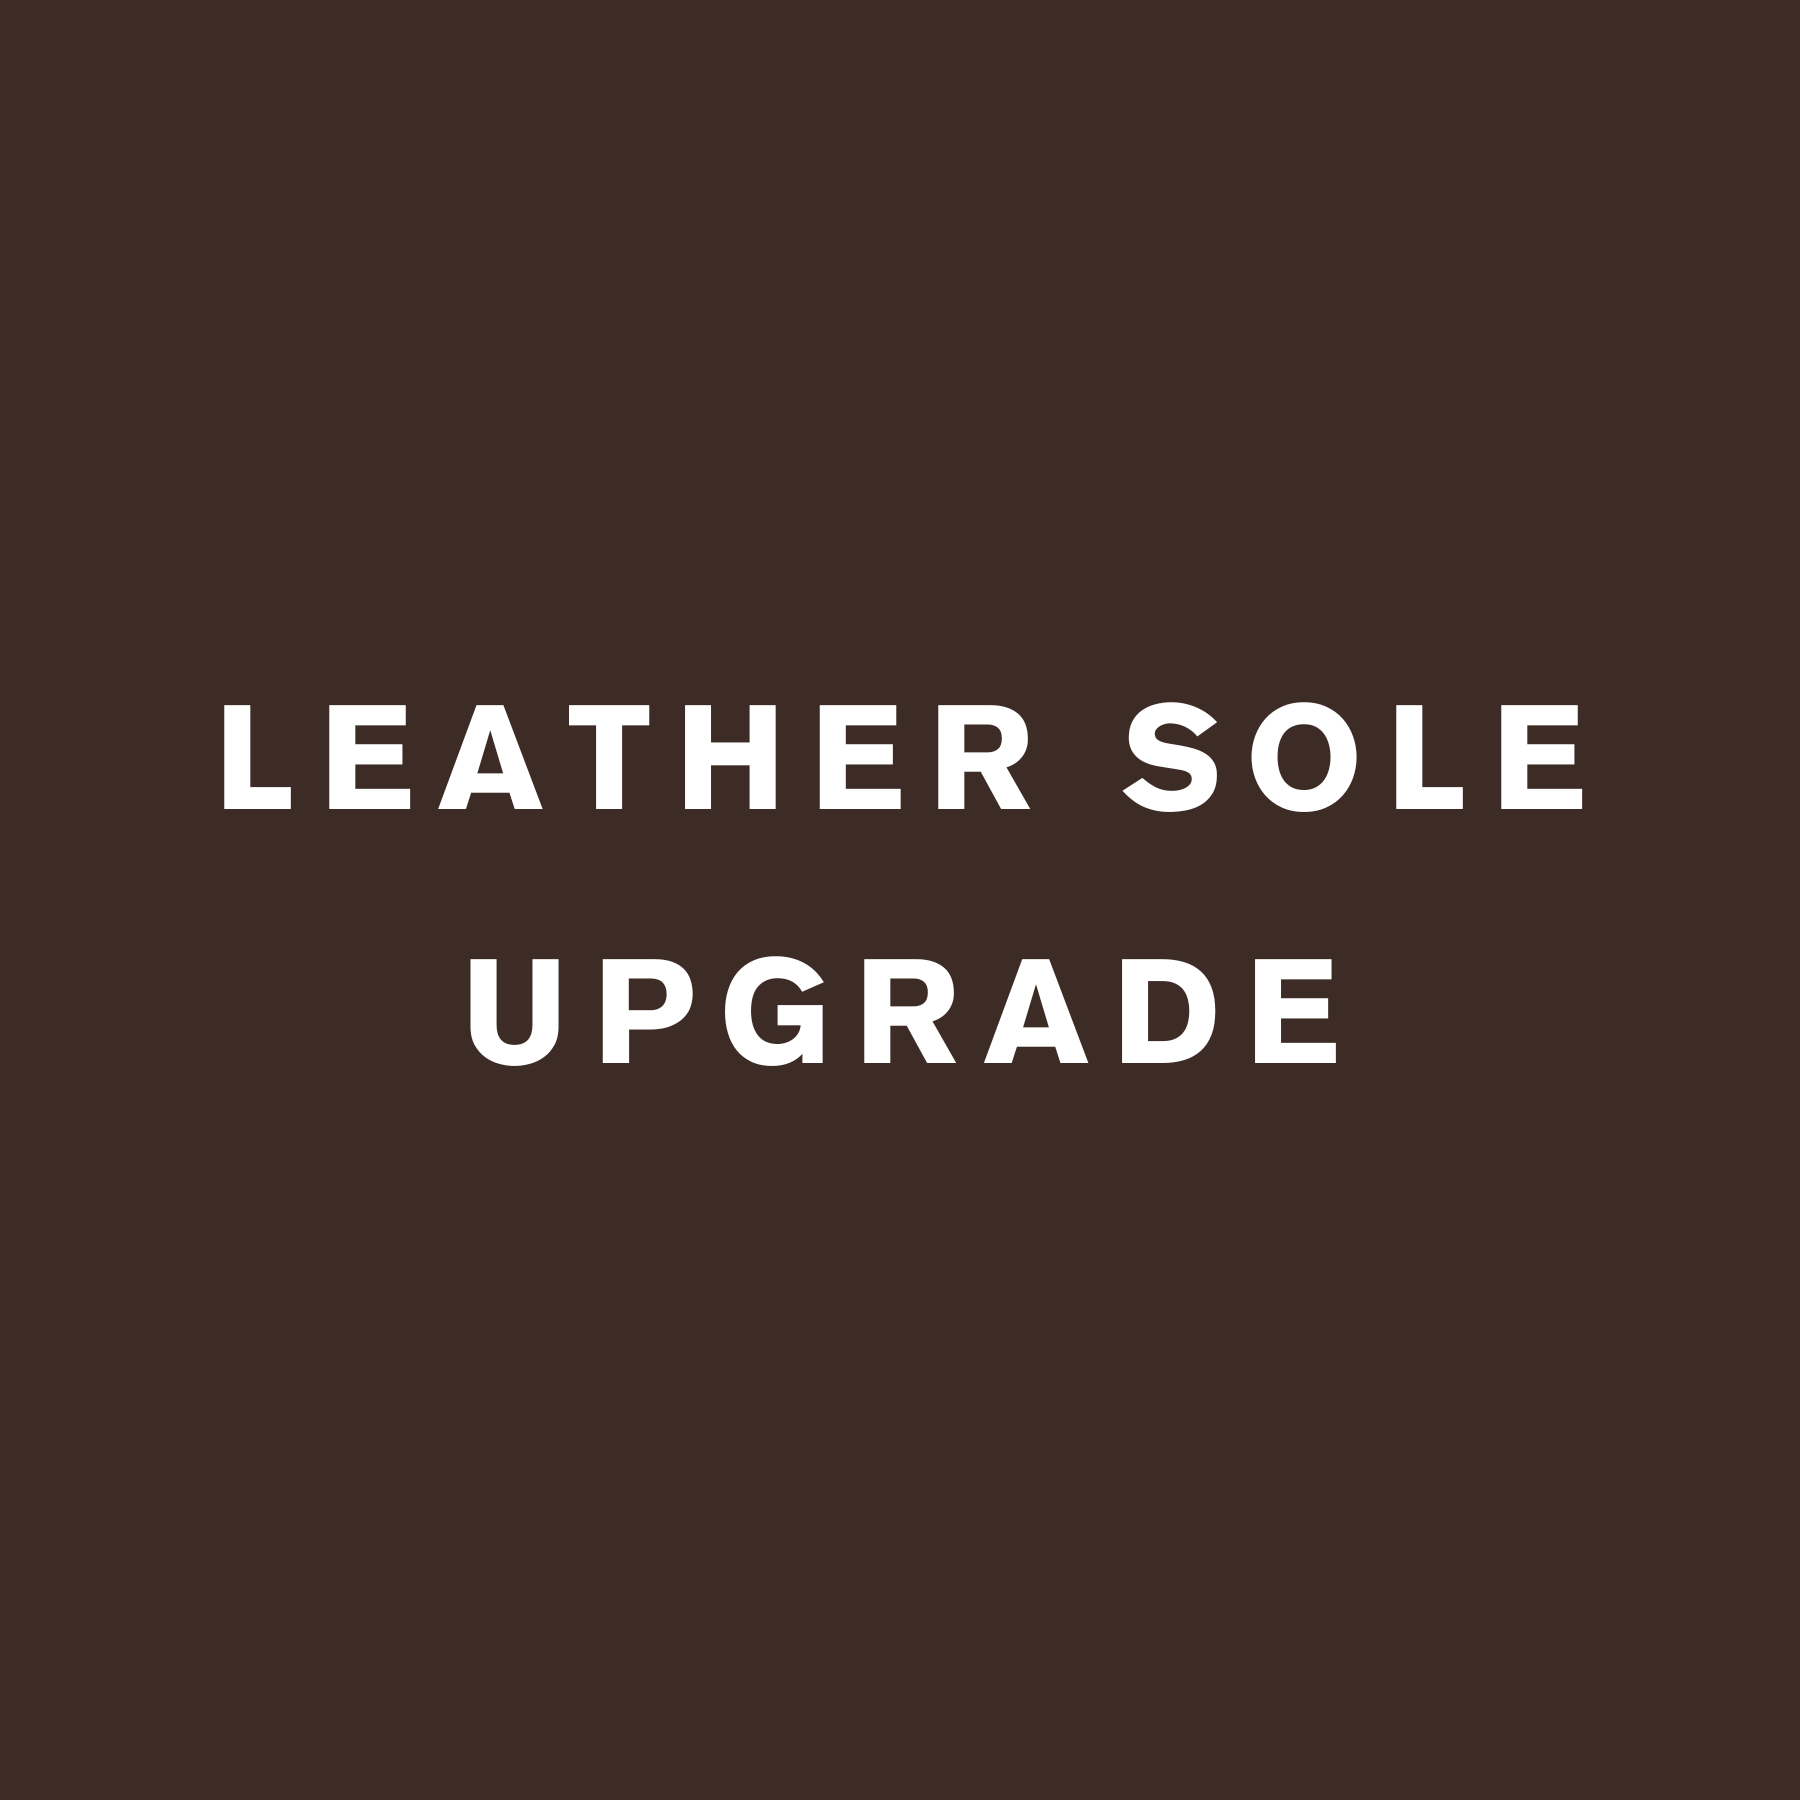 Leather Sole Upgrade - May Anthony